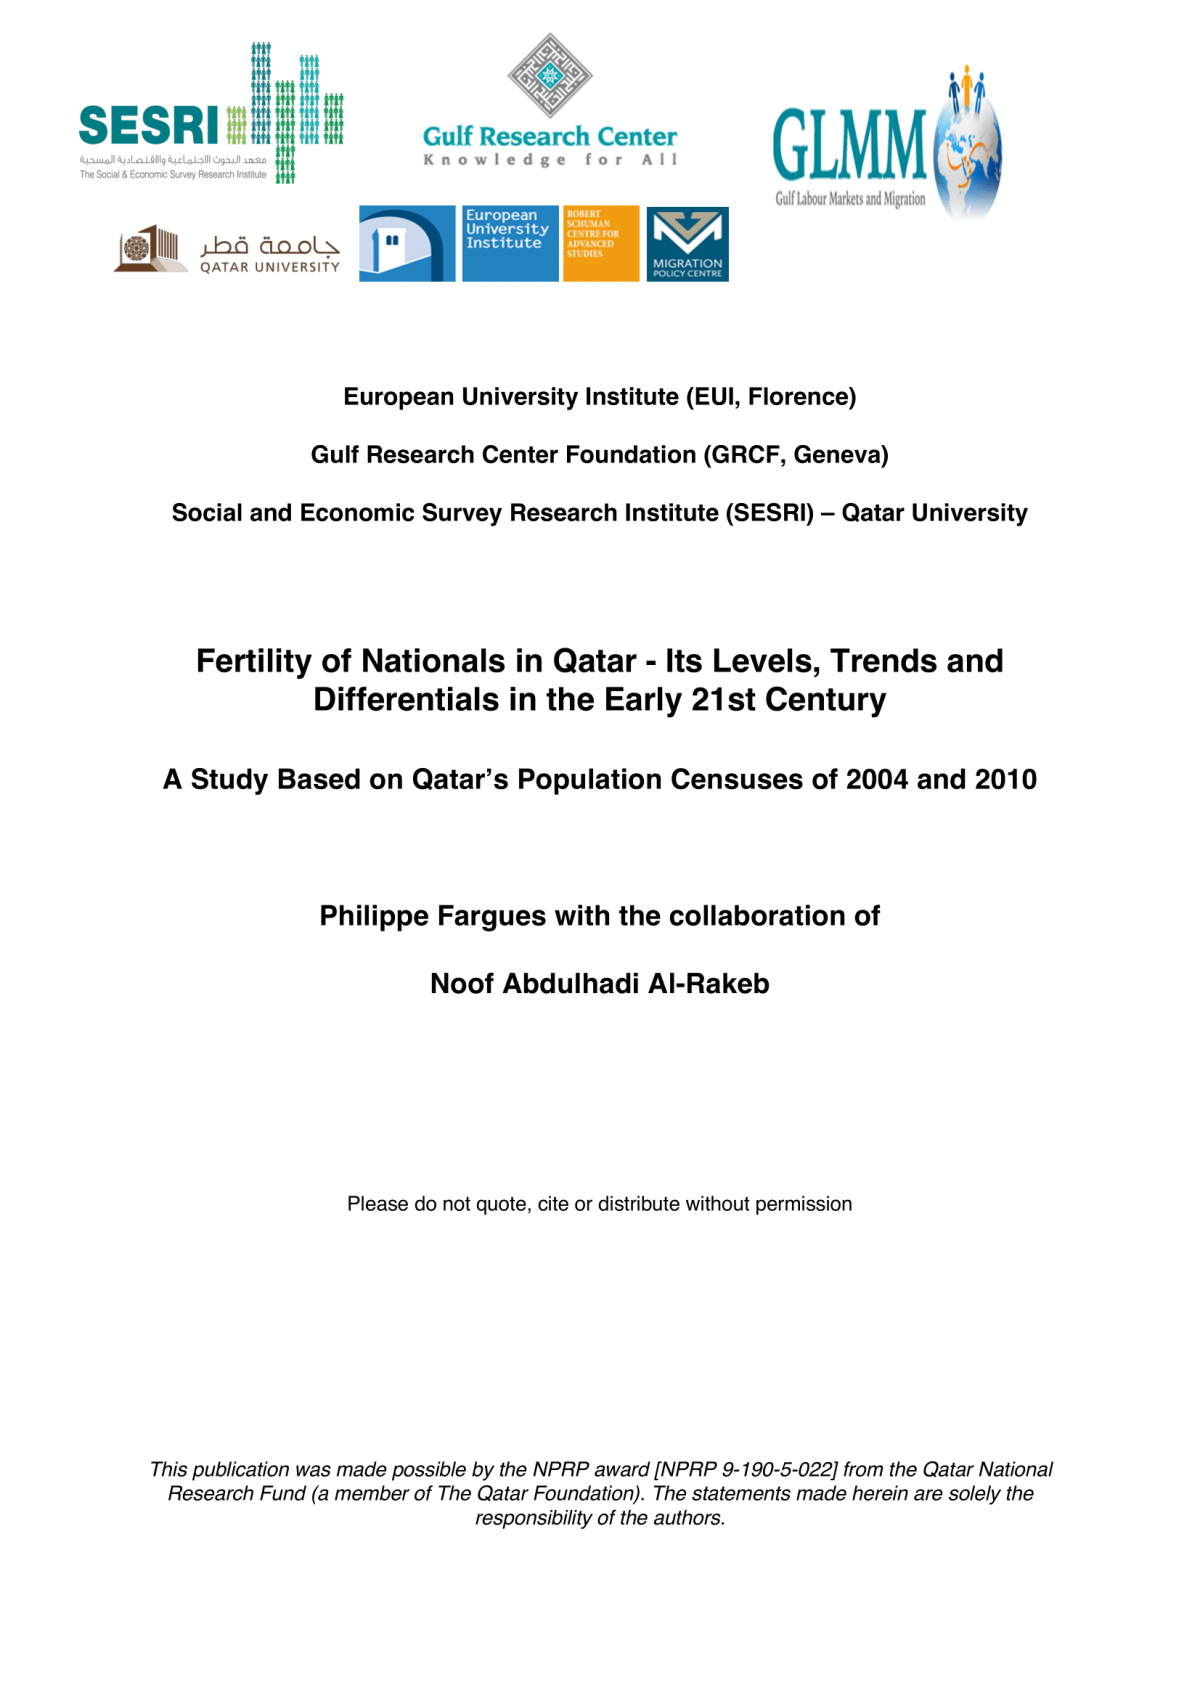 Fertility of Nationals in Qatar – Its Levels, Trends and Differentials in the Early 21st Century, A Study Based on Qatar’s Population Censuses of 2004 and 2010